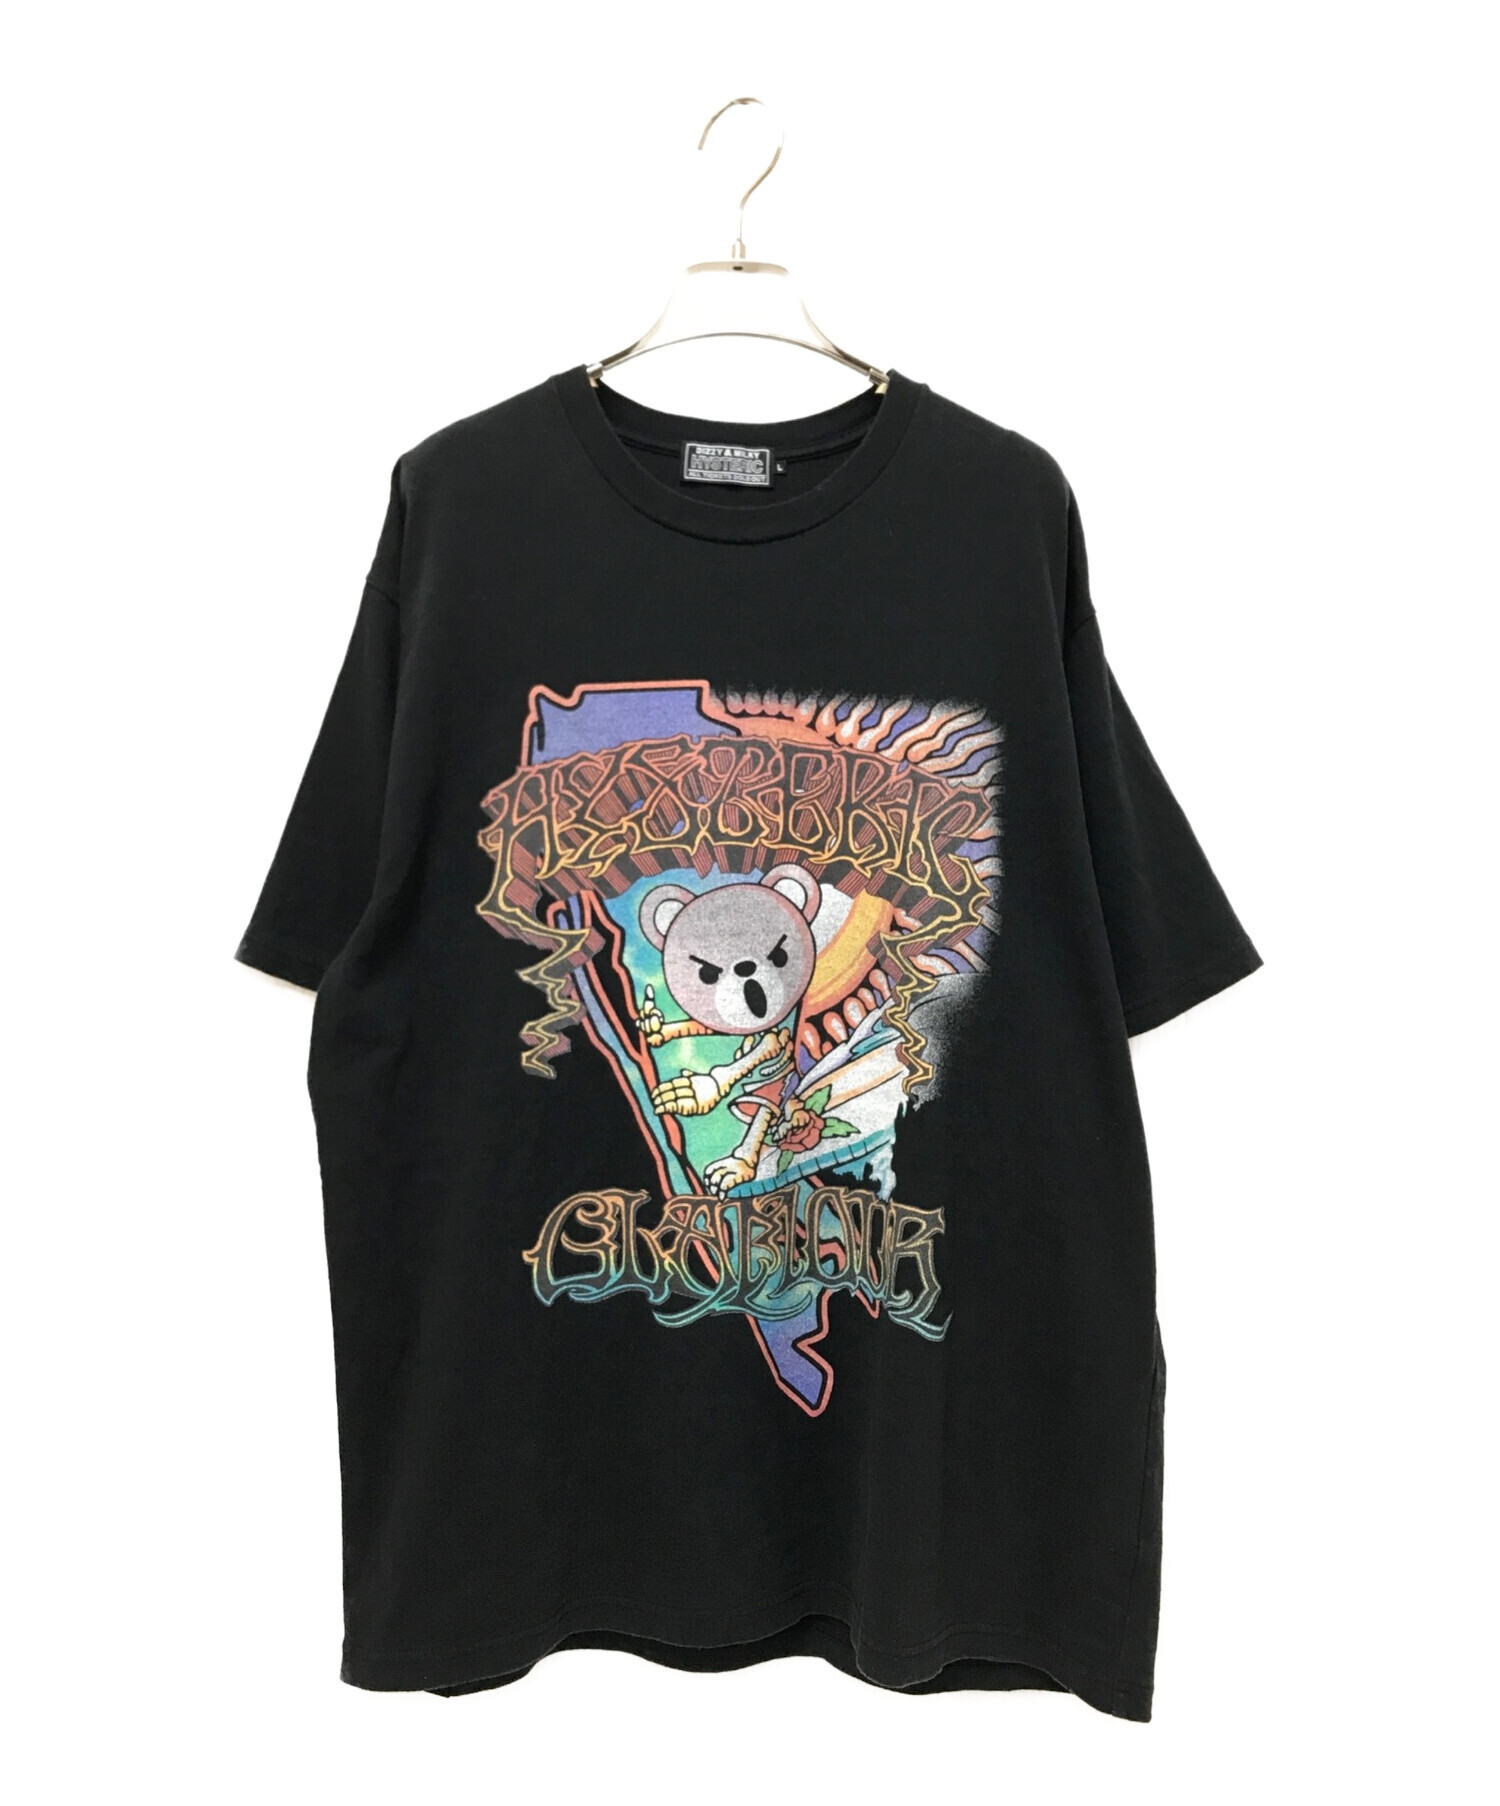 HYSTERIC GLAMOUR BEAR Tシャツ